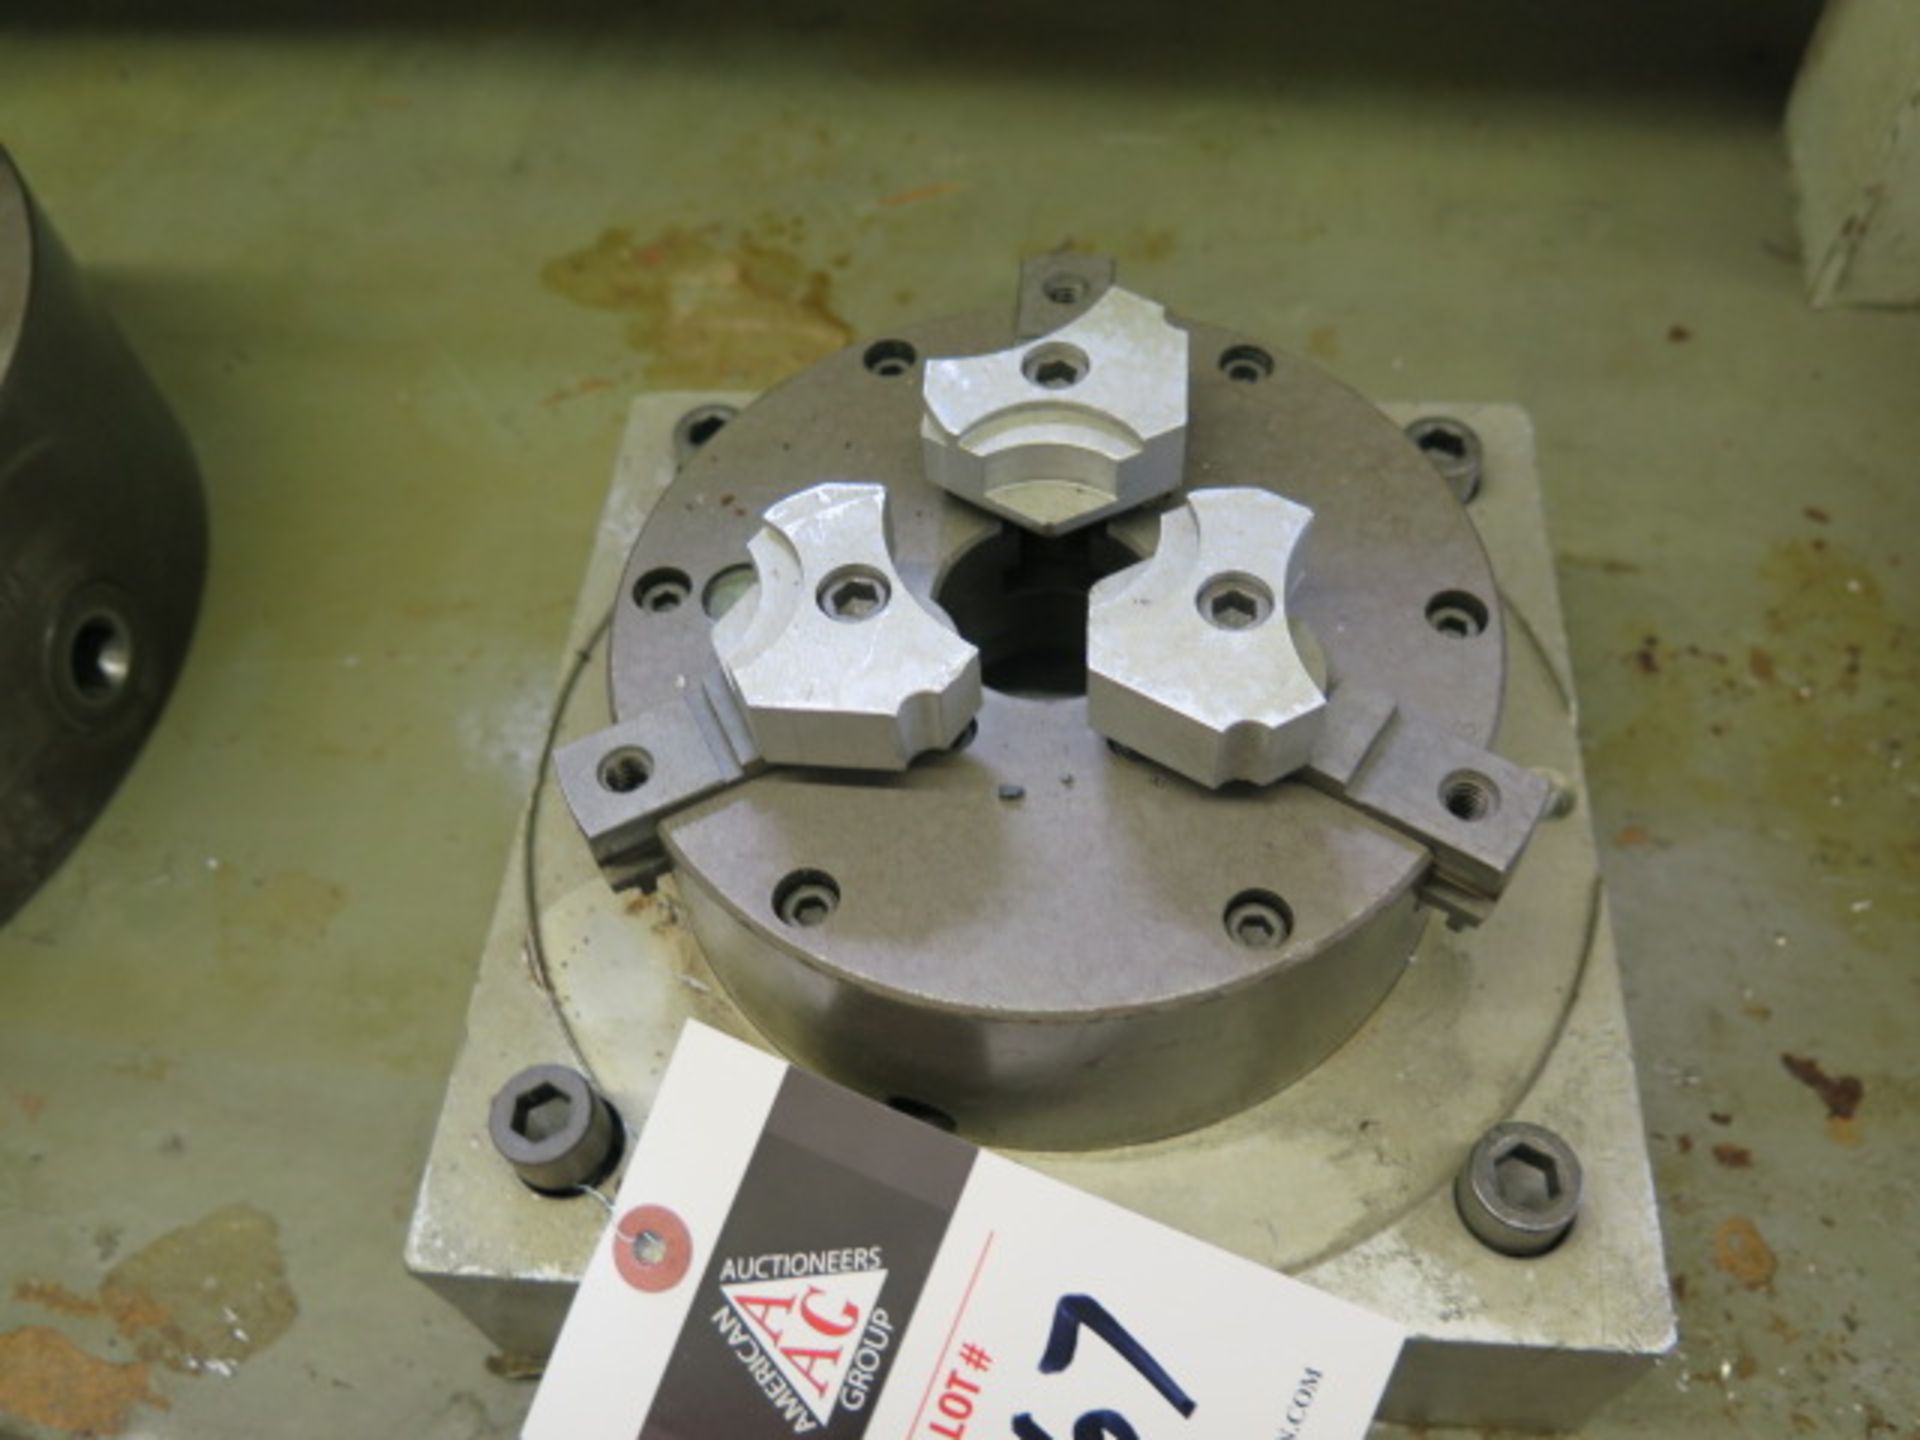 6" 3-Jaw Chuck w/ Fixture Base (SOLD AS-IS - NO WARRANTY) - Image 2 of 3